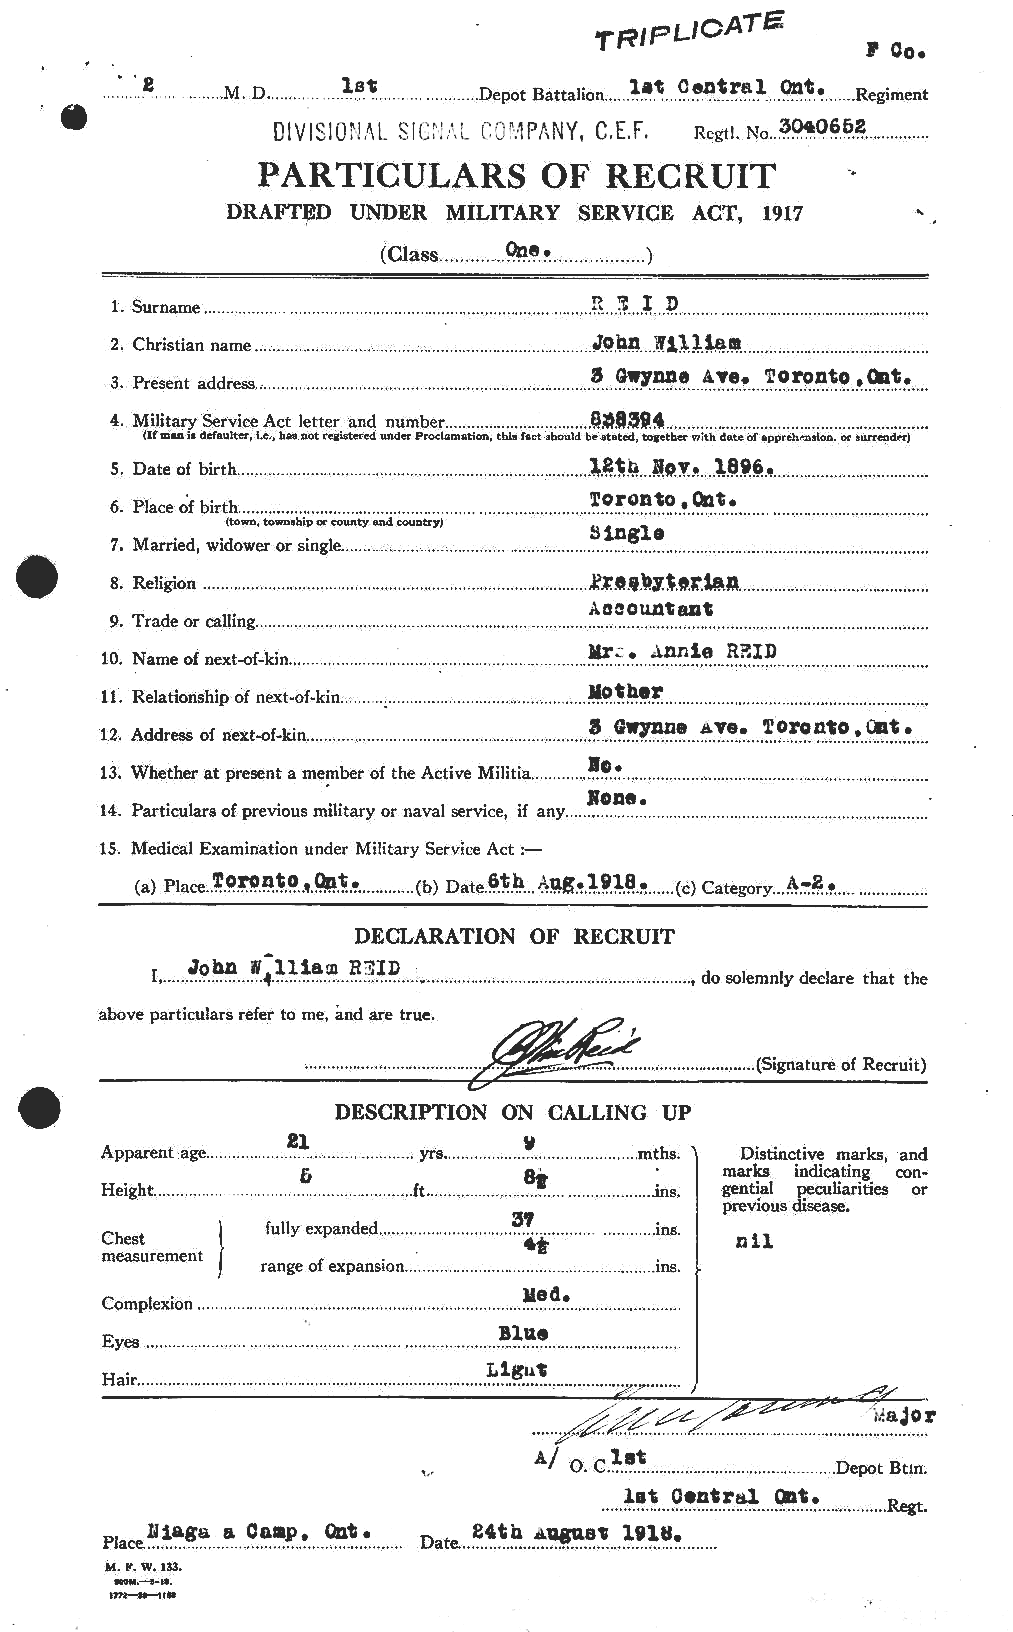 Personnel Records of the First World War - CEF 598883a